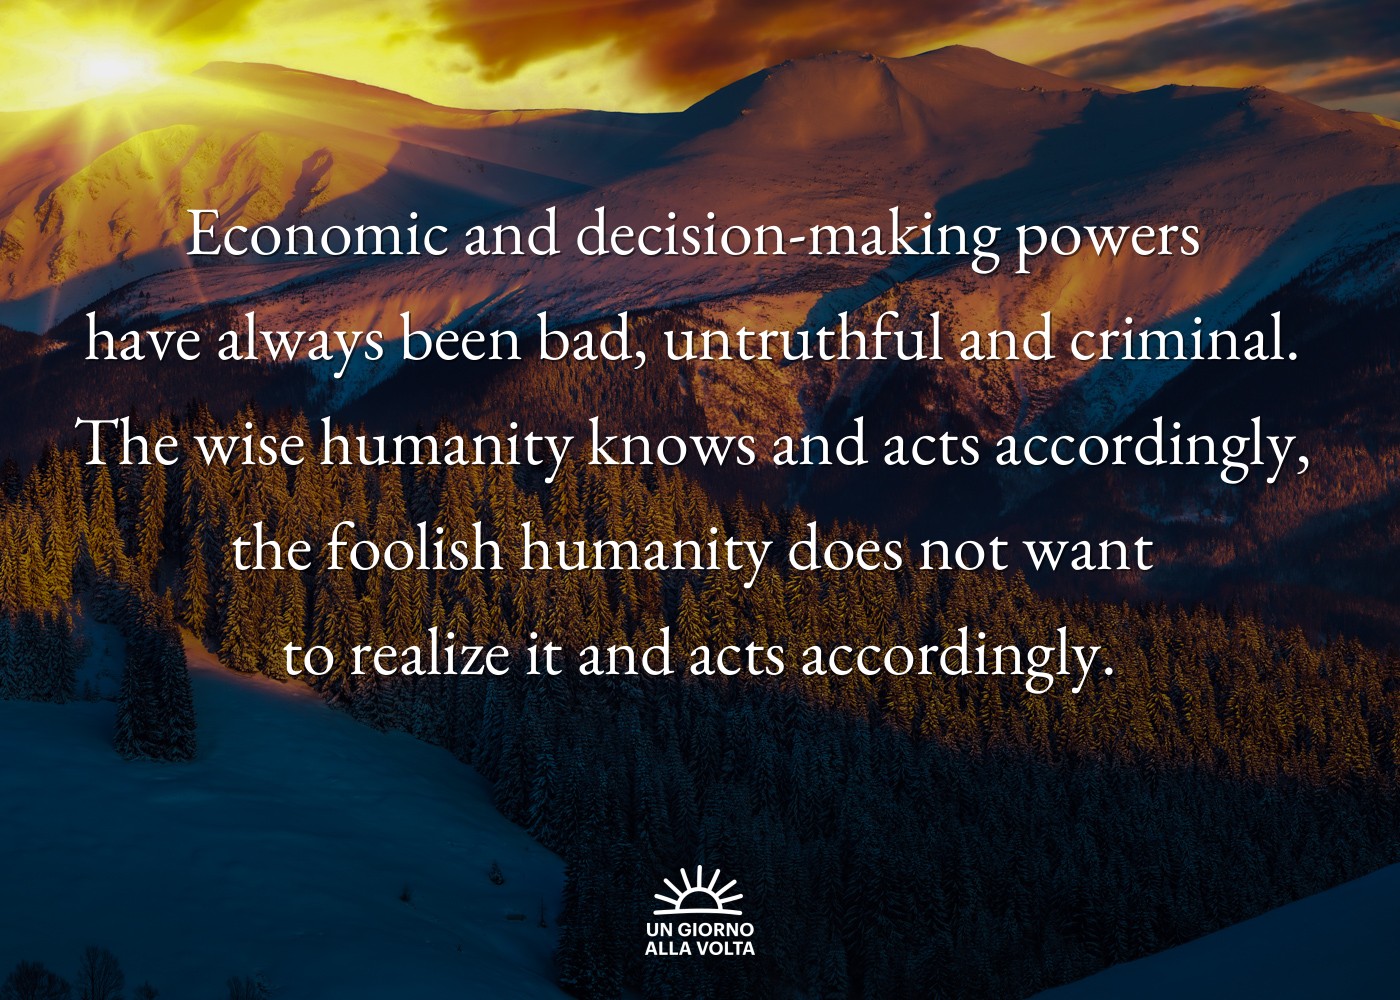 Economic and decision-making powers 
have always been bad, untruthful and criminal. 
The wise humanity knows and acts accordingly, 
the foolish humanity does not want 
to realize it and acts accordingly.
